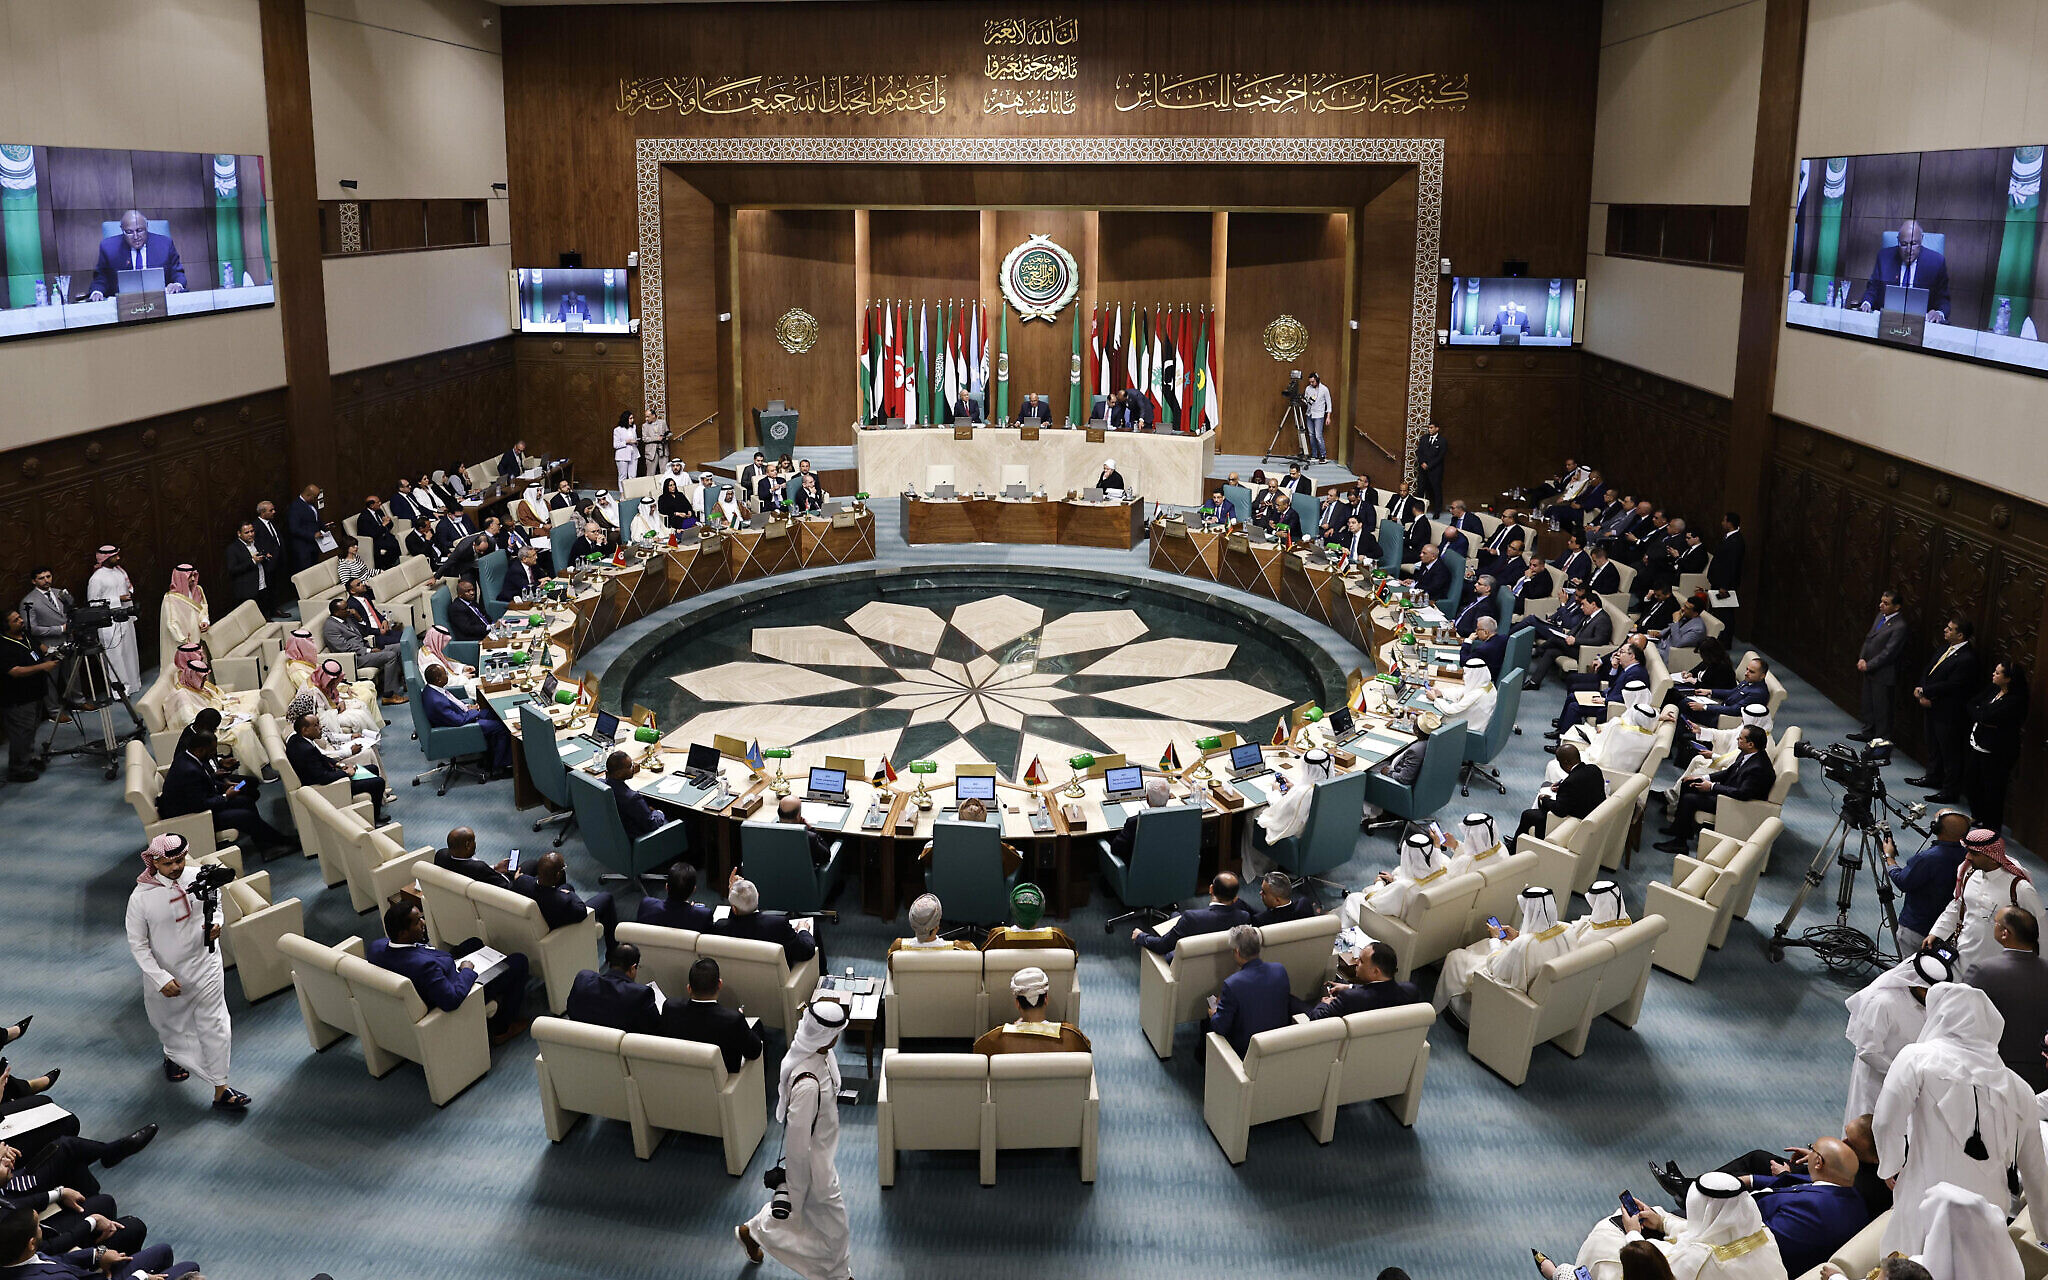 What drove Syria's return to the Arab League, and what impact will it